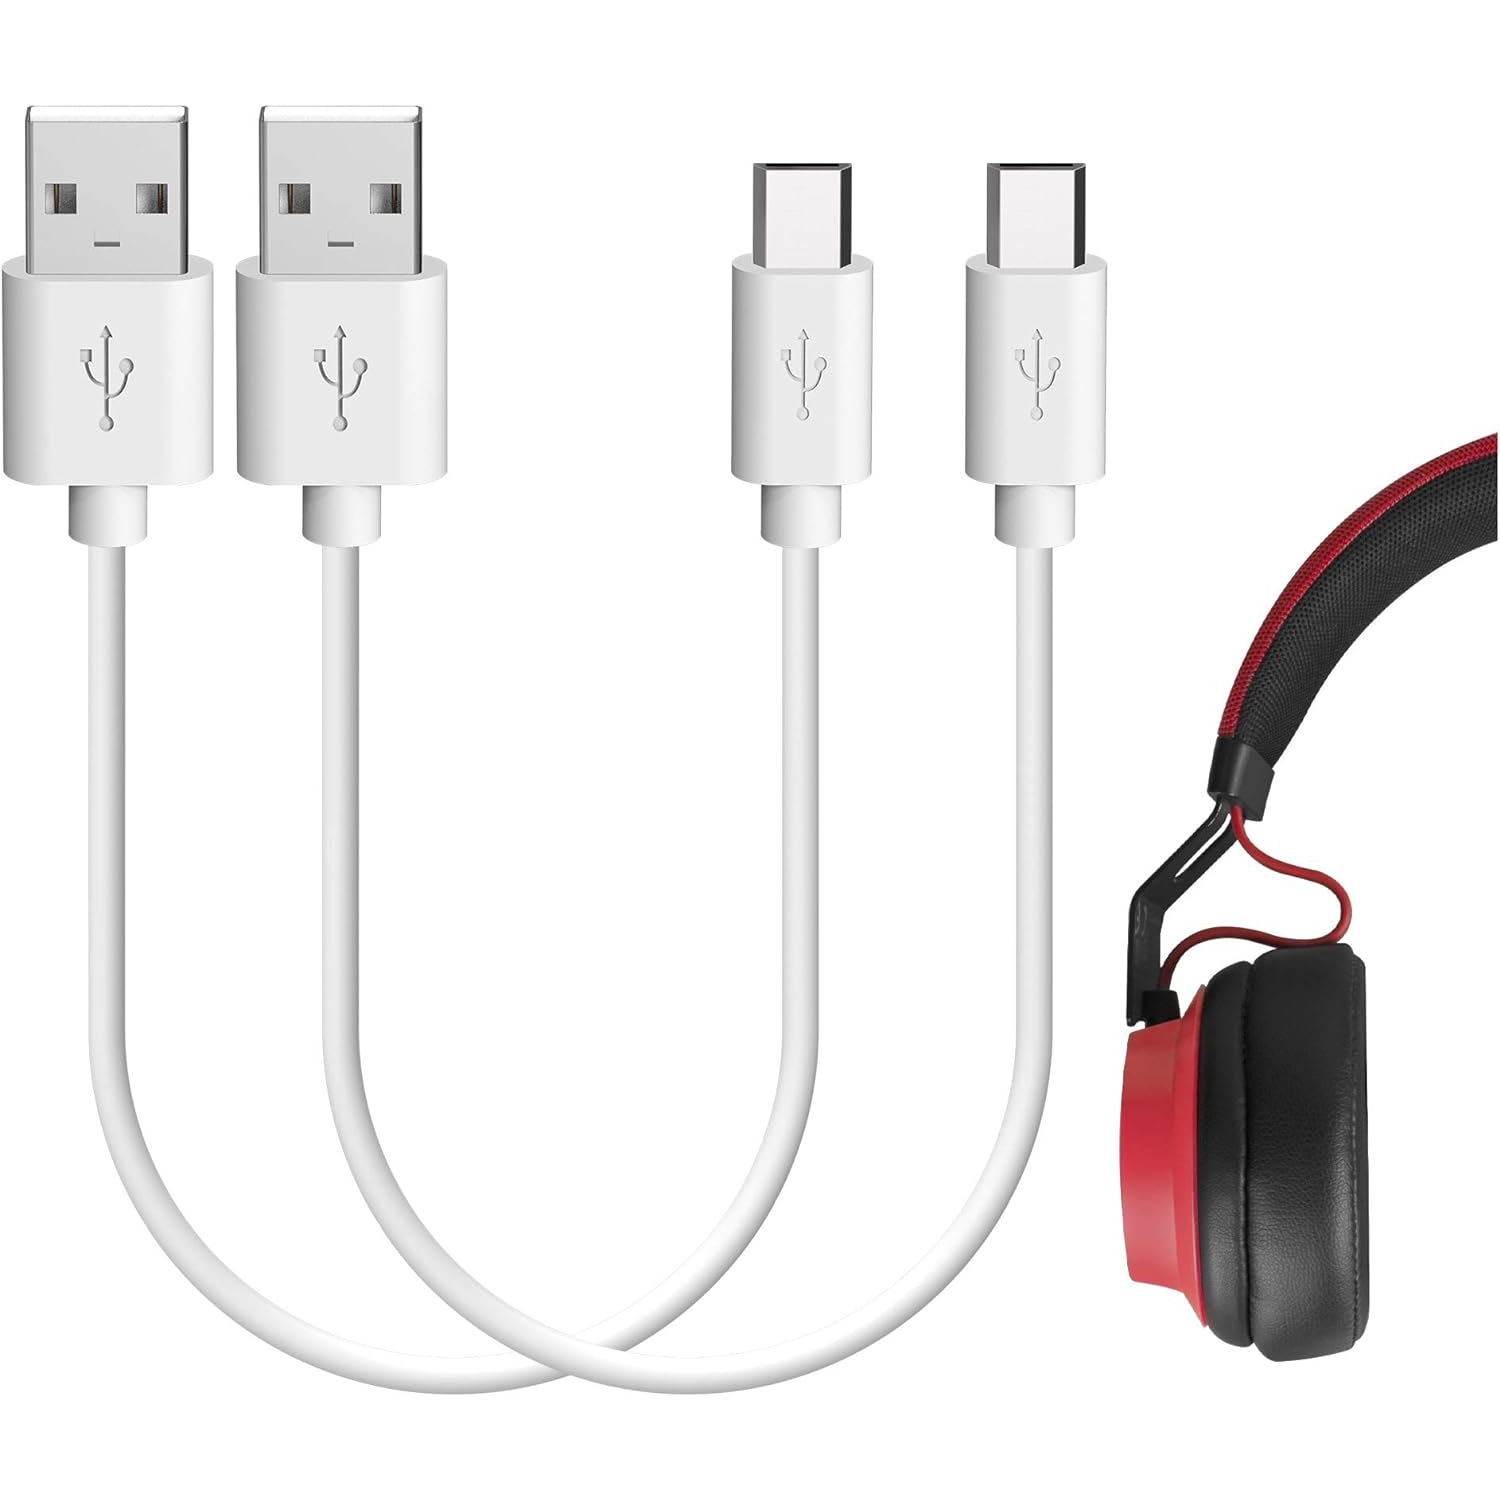 Micro-USB Headphones Short Charger Cable Compatible with Jabra Move Style, Elite 65t, Elite Sport Charger, USB